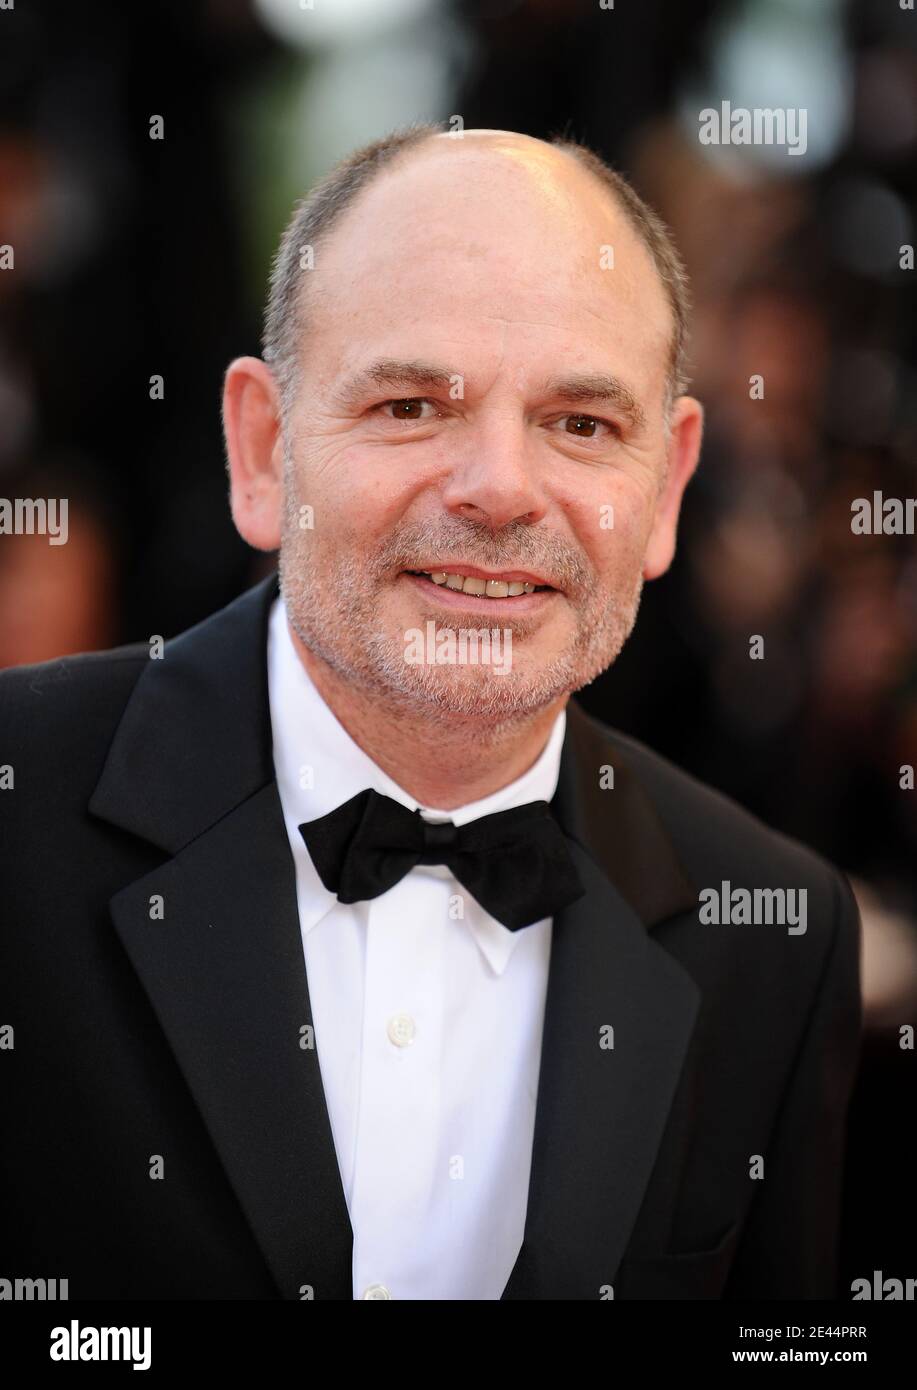 Jean-Pierre Darroussin attends the screening of Pixars Studios's 'Up' at the 62nd Cannes Film Festival in Cannes, France on May 13, 2009. Photo by Lionel Hahn/ABACAPRESS.COM Stock Photo